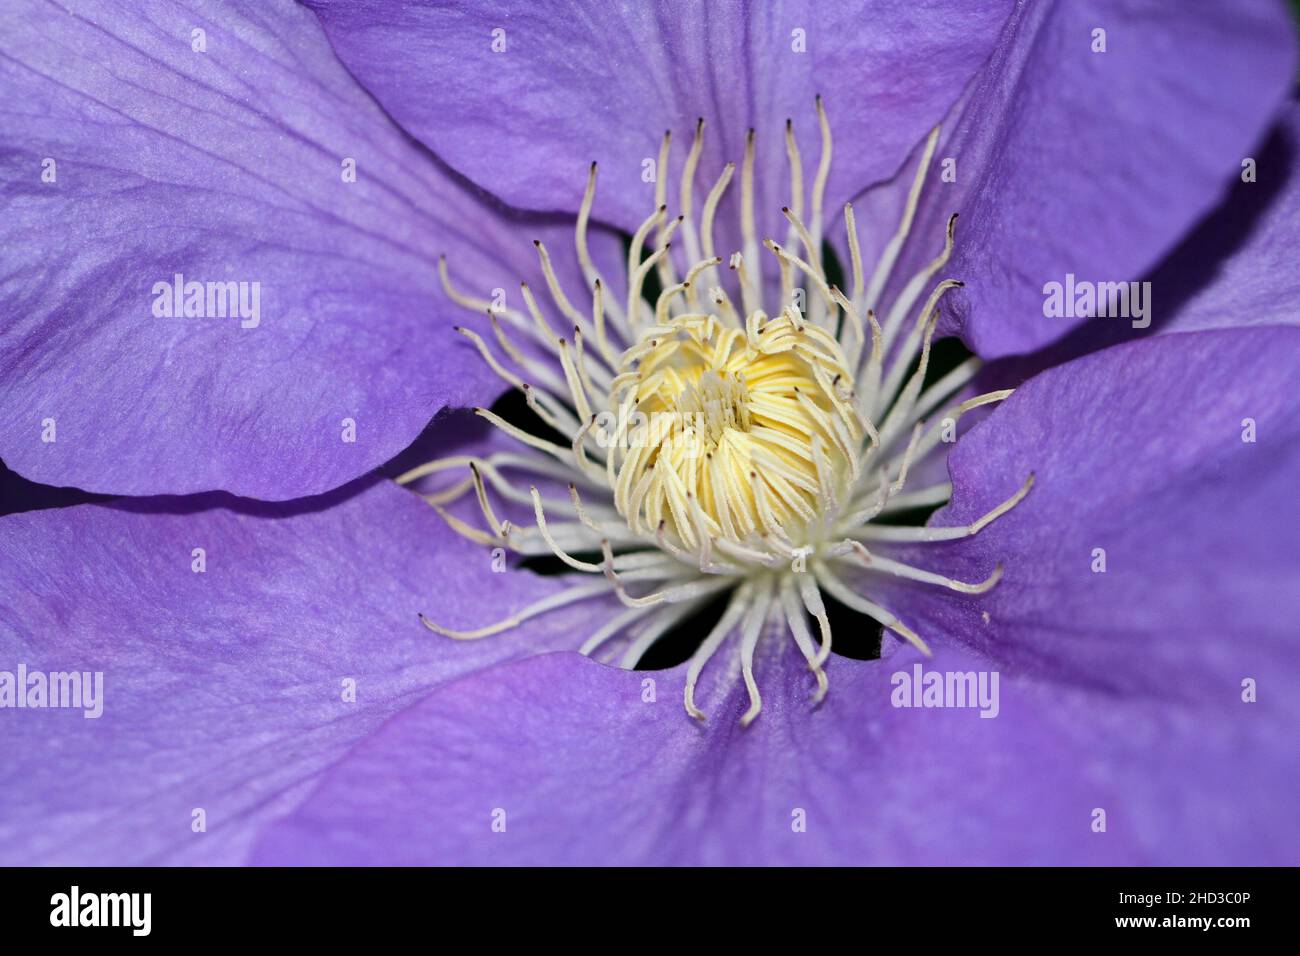 A close-up of a purple flower of a cultivated clematis plant/vine in a garden in Nanaimo, Vancouver Island, BC, Canada in June Stock Photo